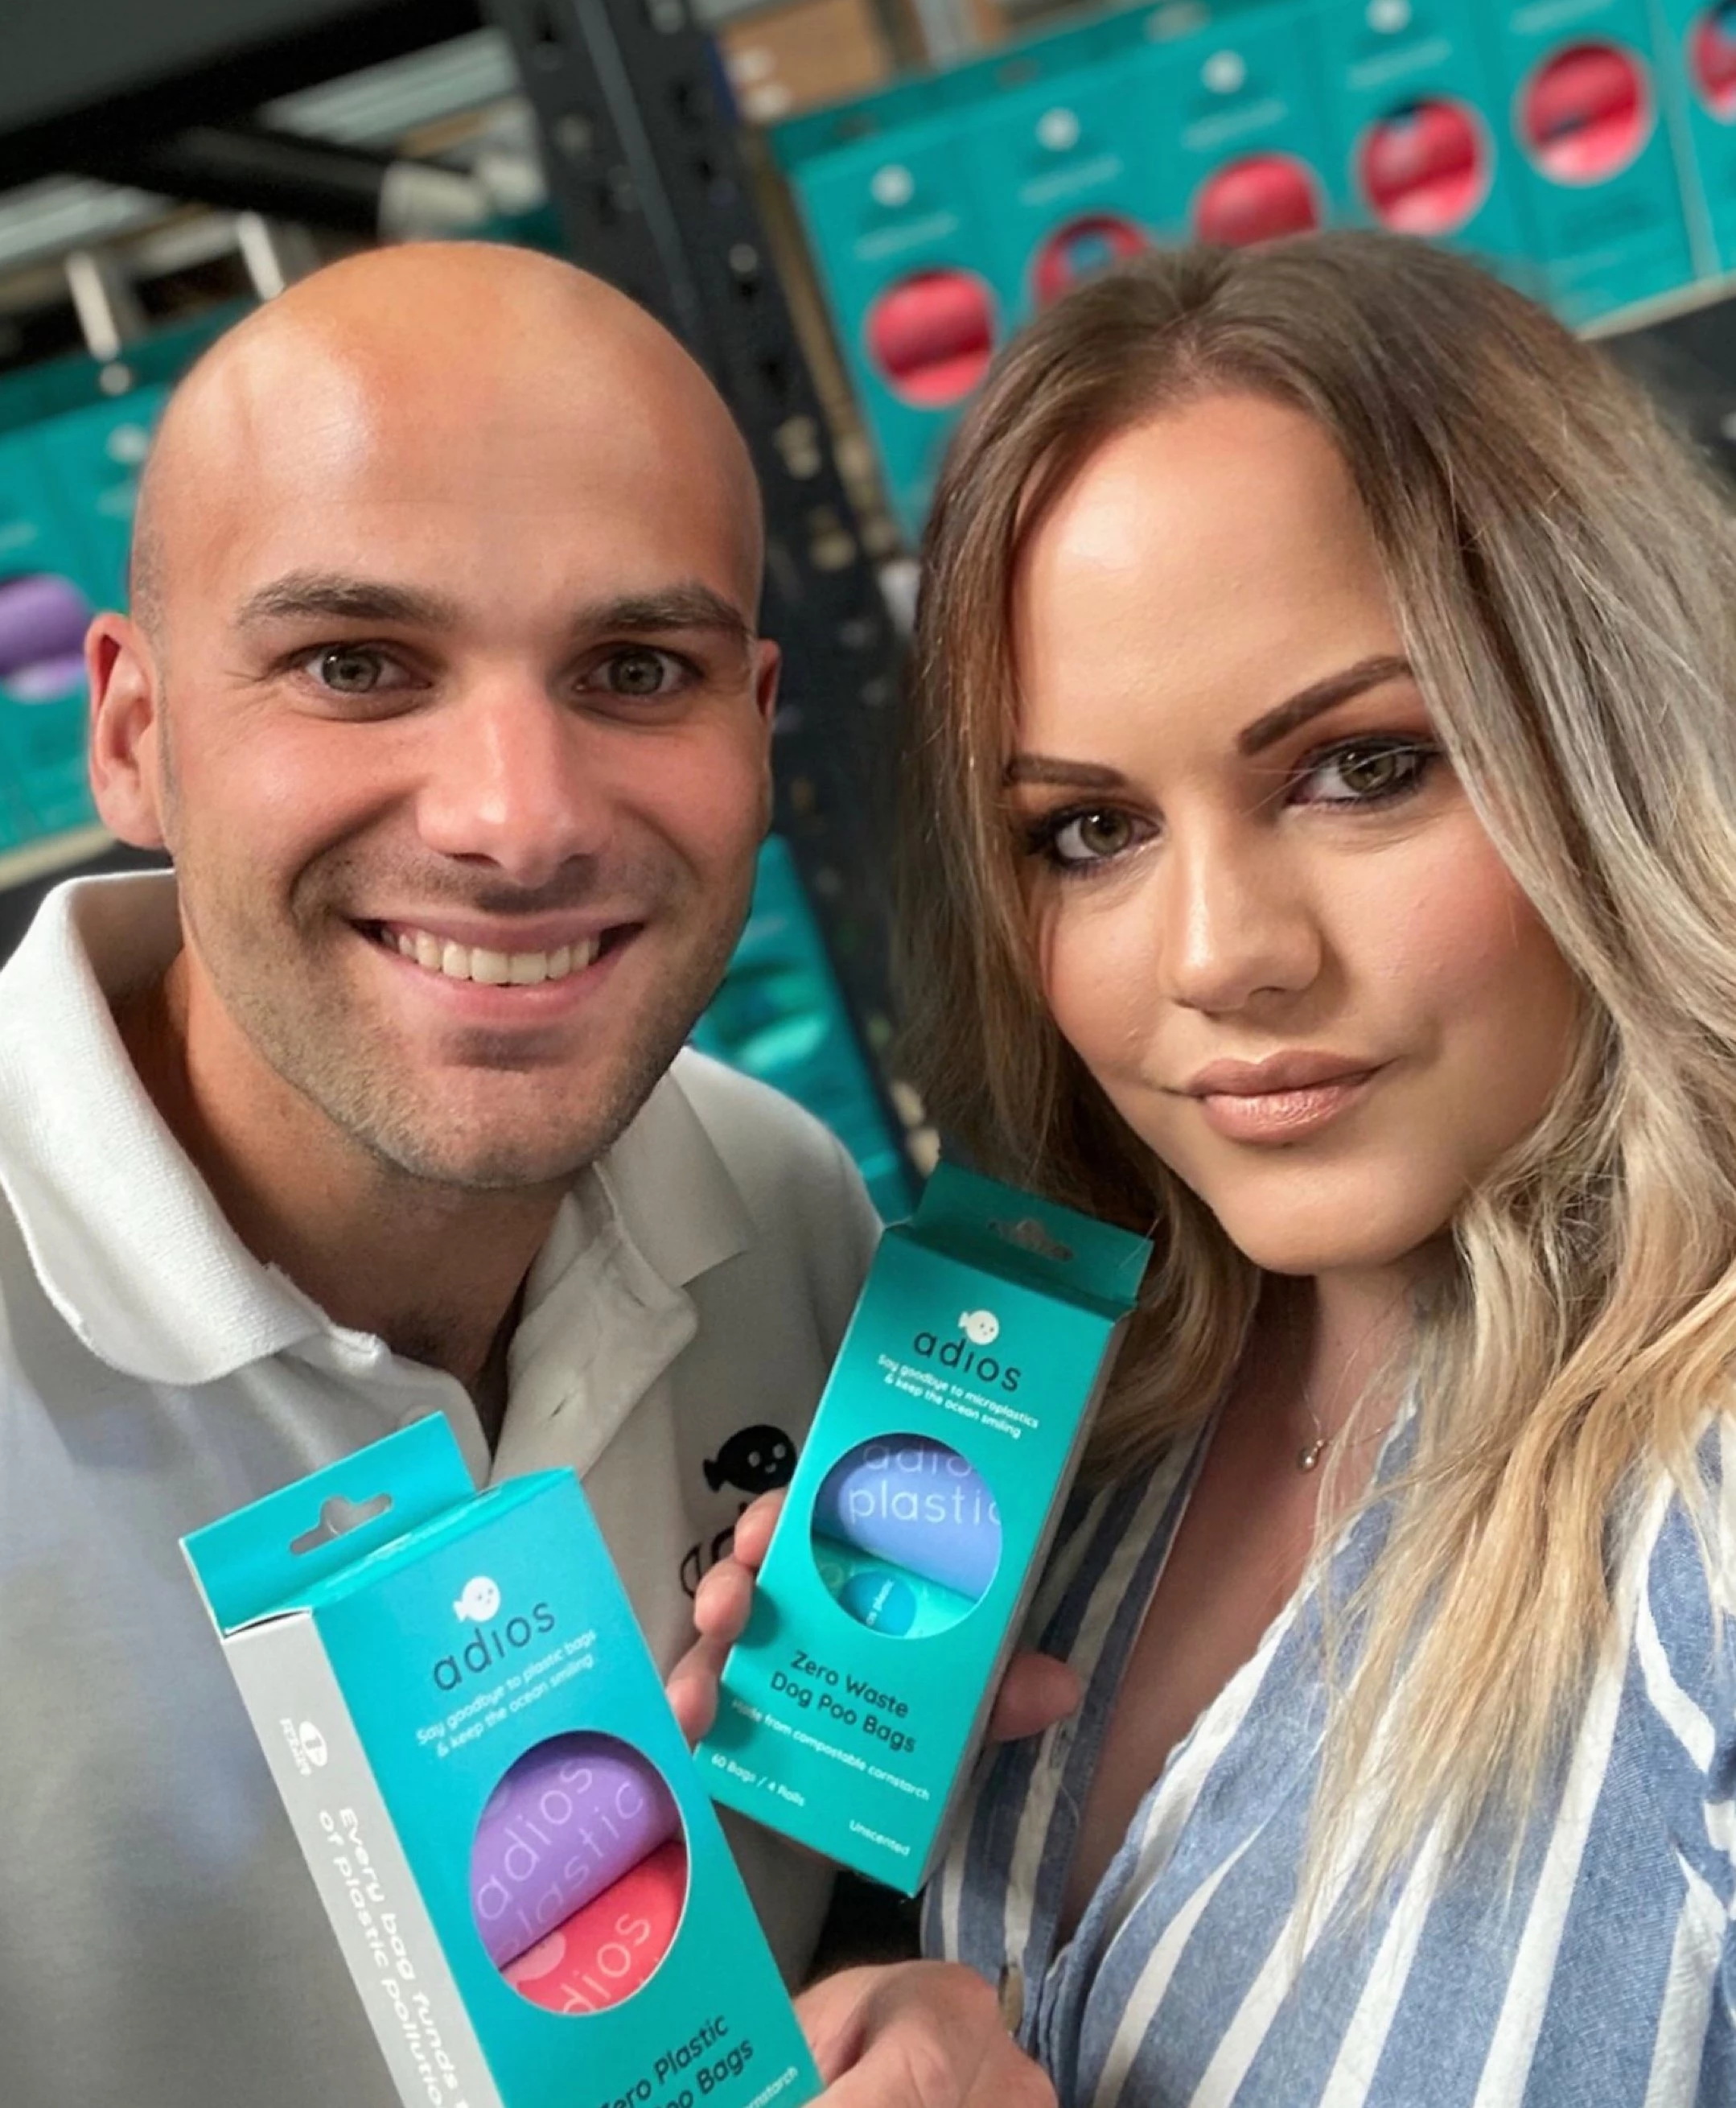 Ben and Sadie Dodd, a Kent-based husband and wife partnership who launched their plastic-free biodegradable poo bag business in 2018